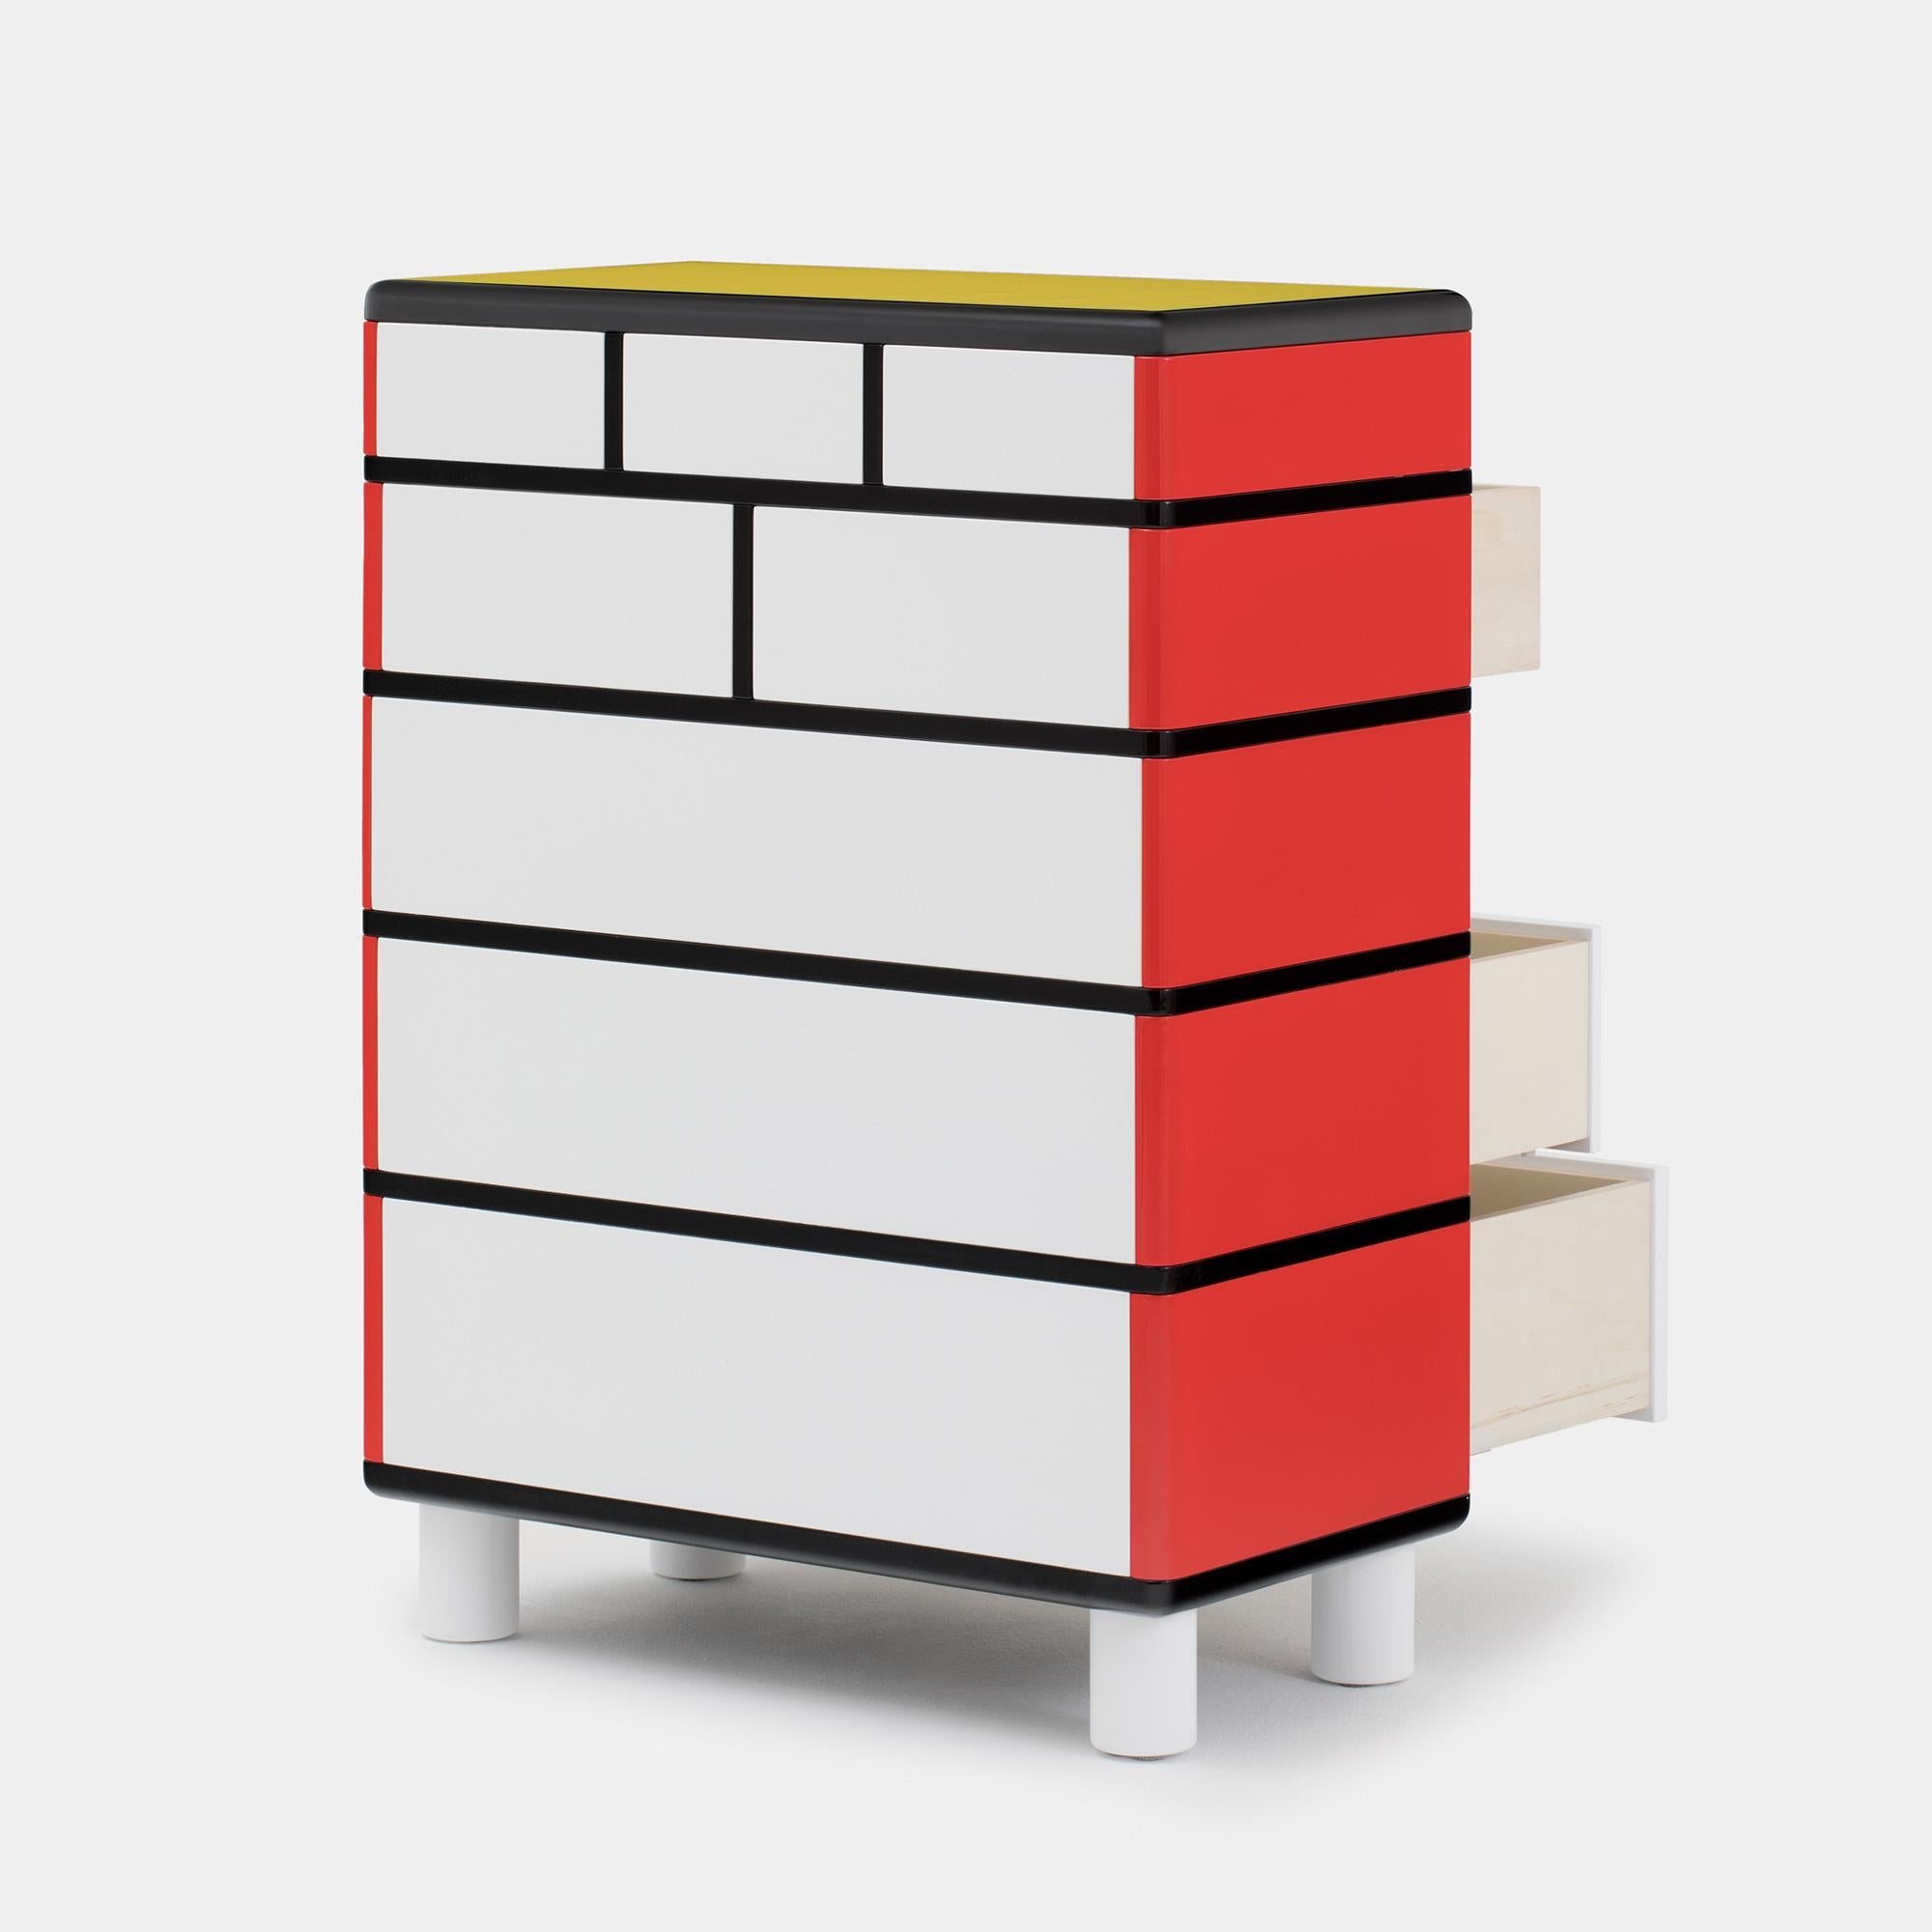 ROSA chest of drawers in Wood by George J. Sowden by Post Design collection/Memphis

The product is purchased with authenticity certificate and guarantee stamp.

Additional Information:
Chest of drawers in lacquered wood, top in plastic